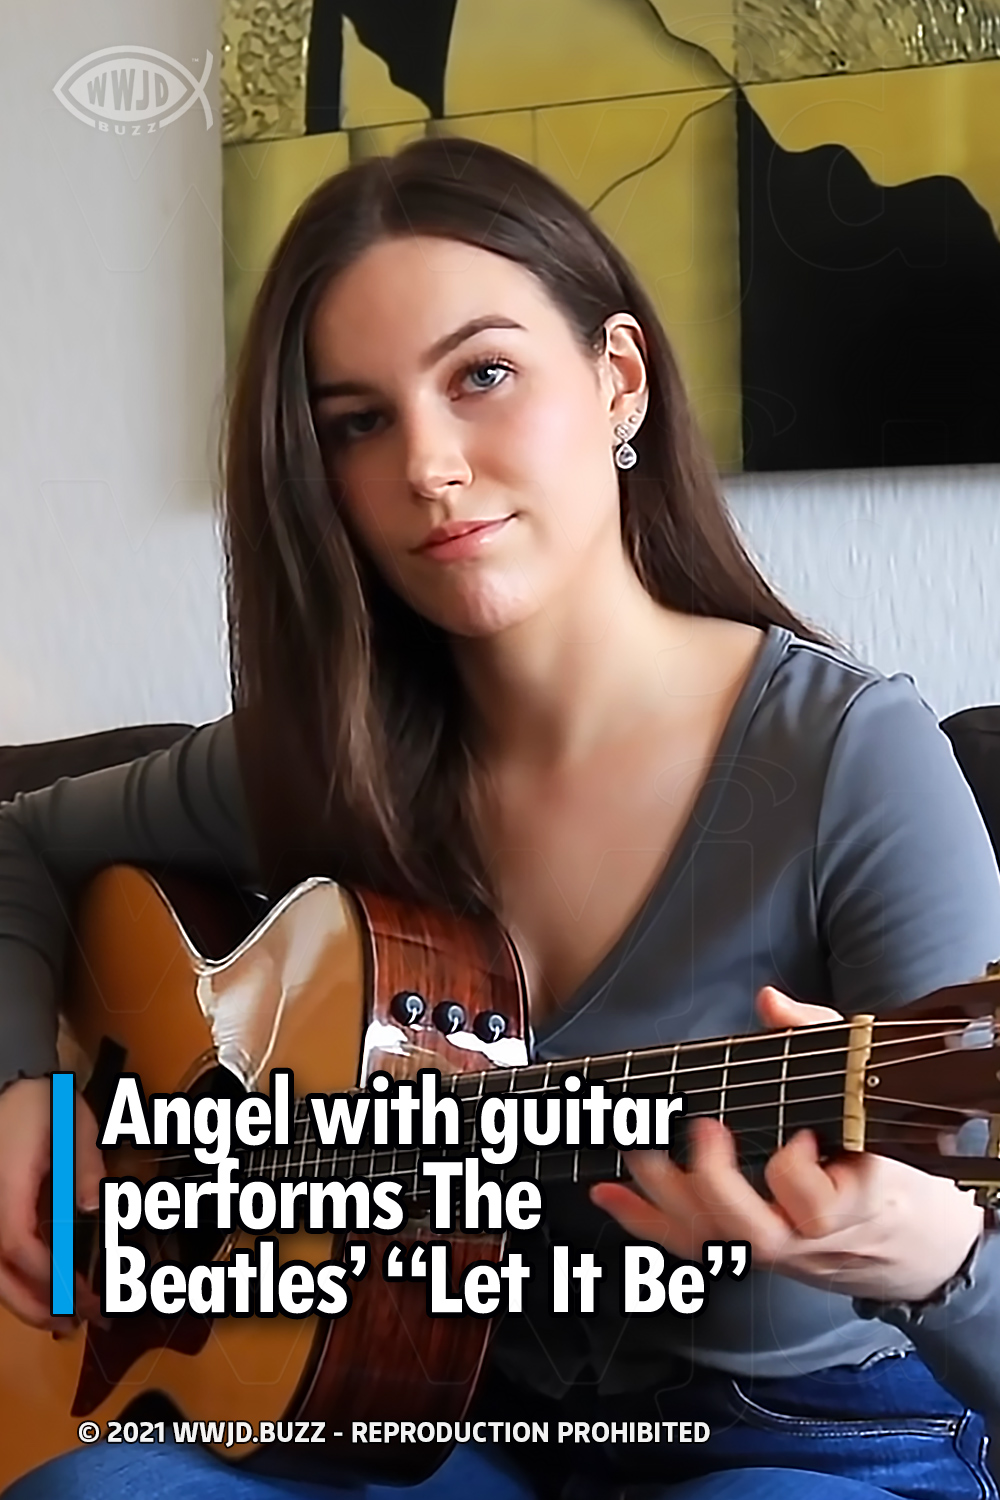 Angel with guitar performs The Beatles’ “Let It Be”